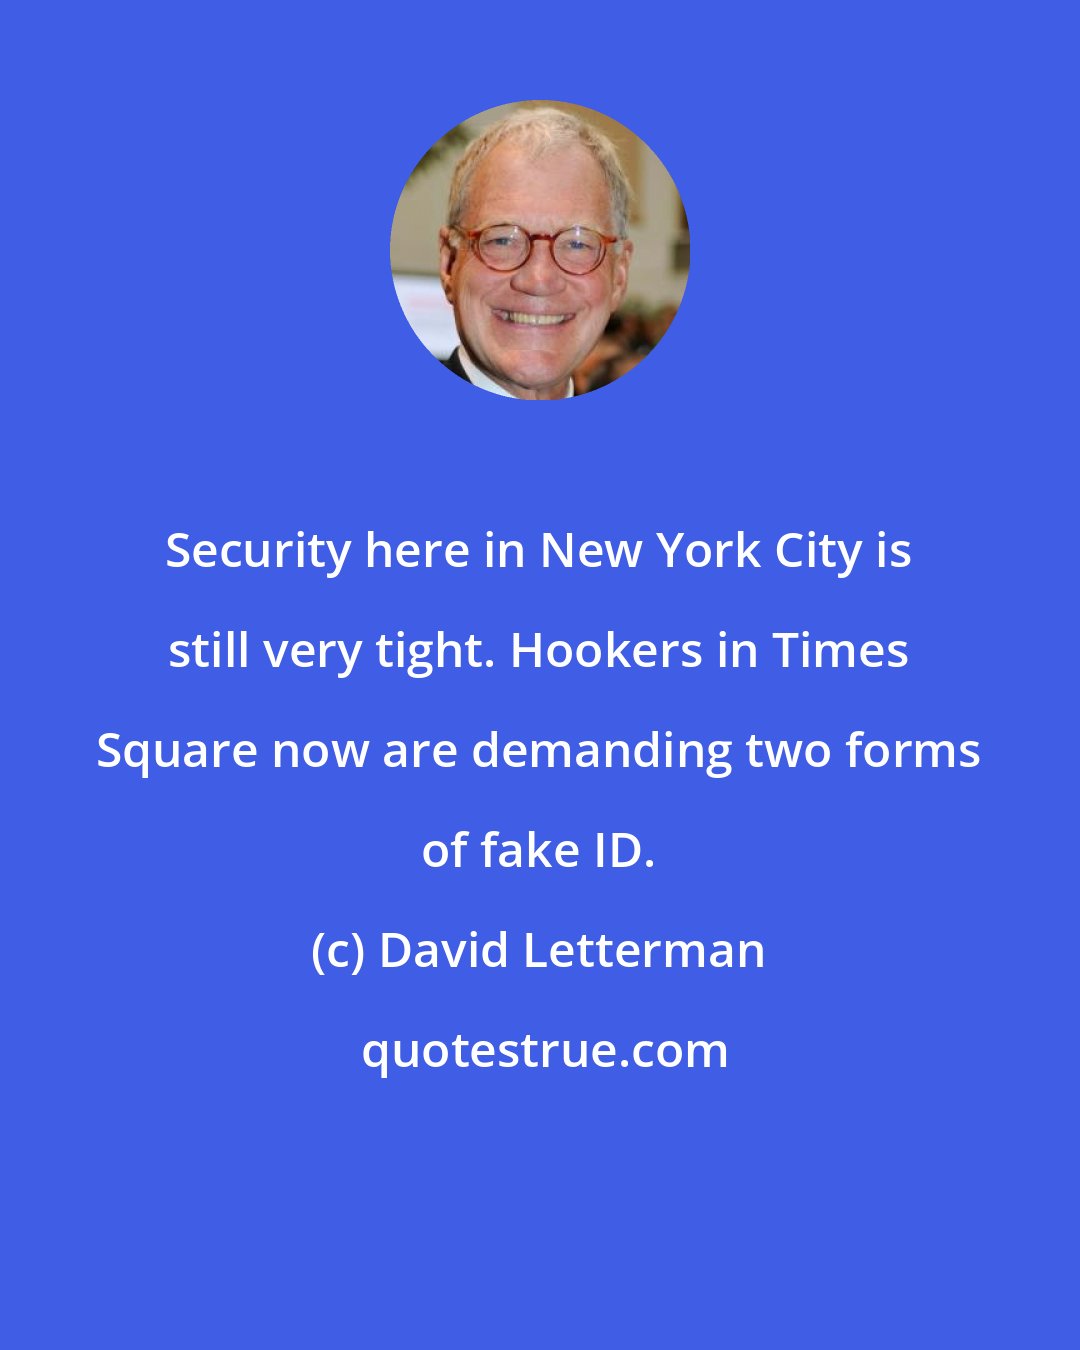 David Letterman: Security here in New York City is still very tight. Hookers in Times Square now are demanding two forms of fake ID.